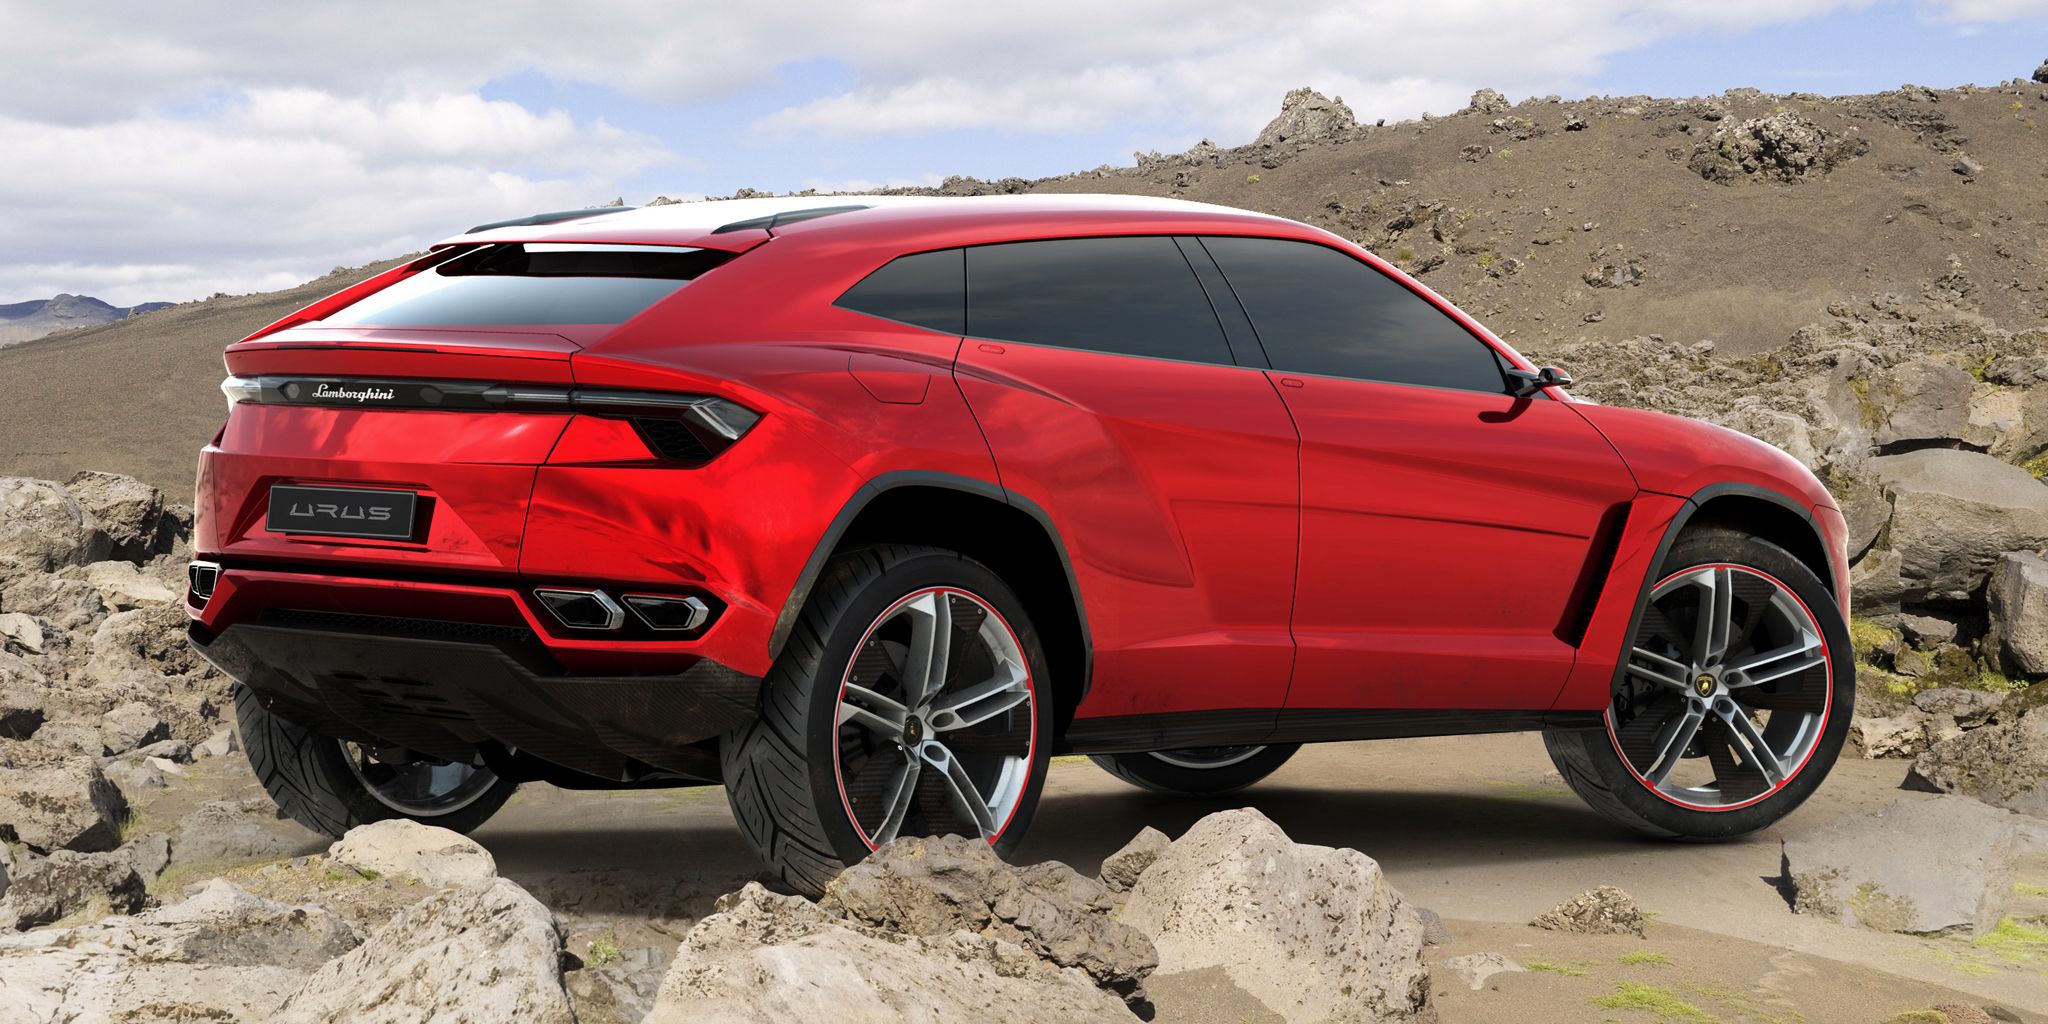 Lambo Suv - Albumccars - Cars Images Collection